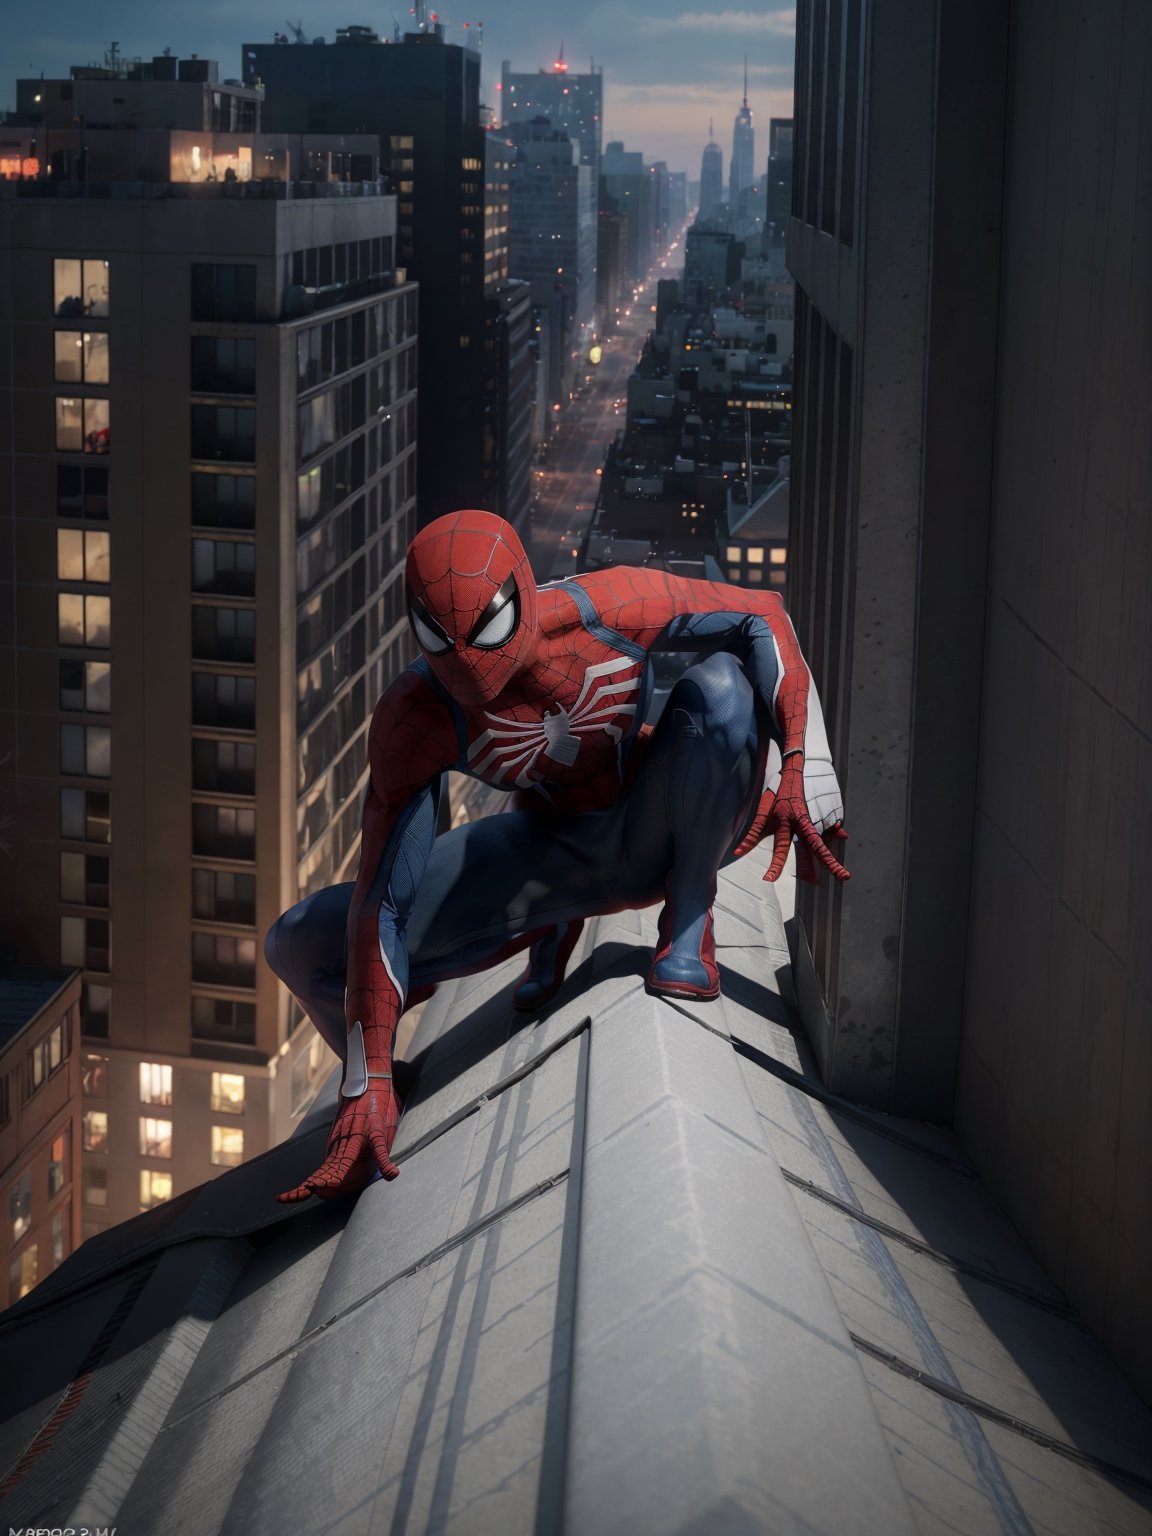 spideyadv2, 1 man crouching on rooftop, 5 fingers, best quality, masterpiece, 8k, uhd, night, new york, flexible man, spiderman pose, comic book style